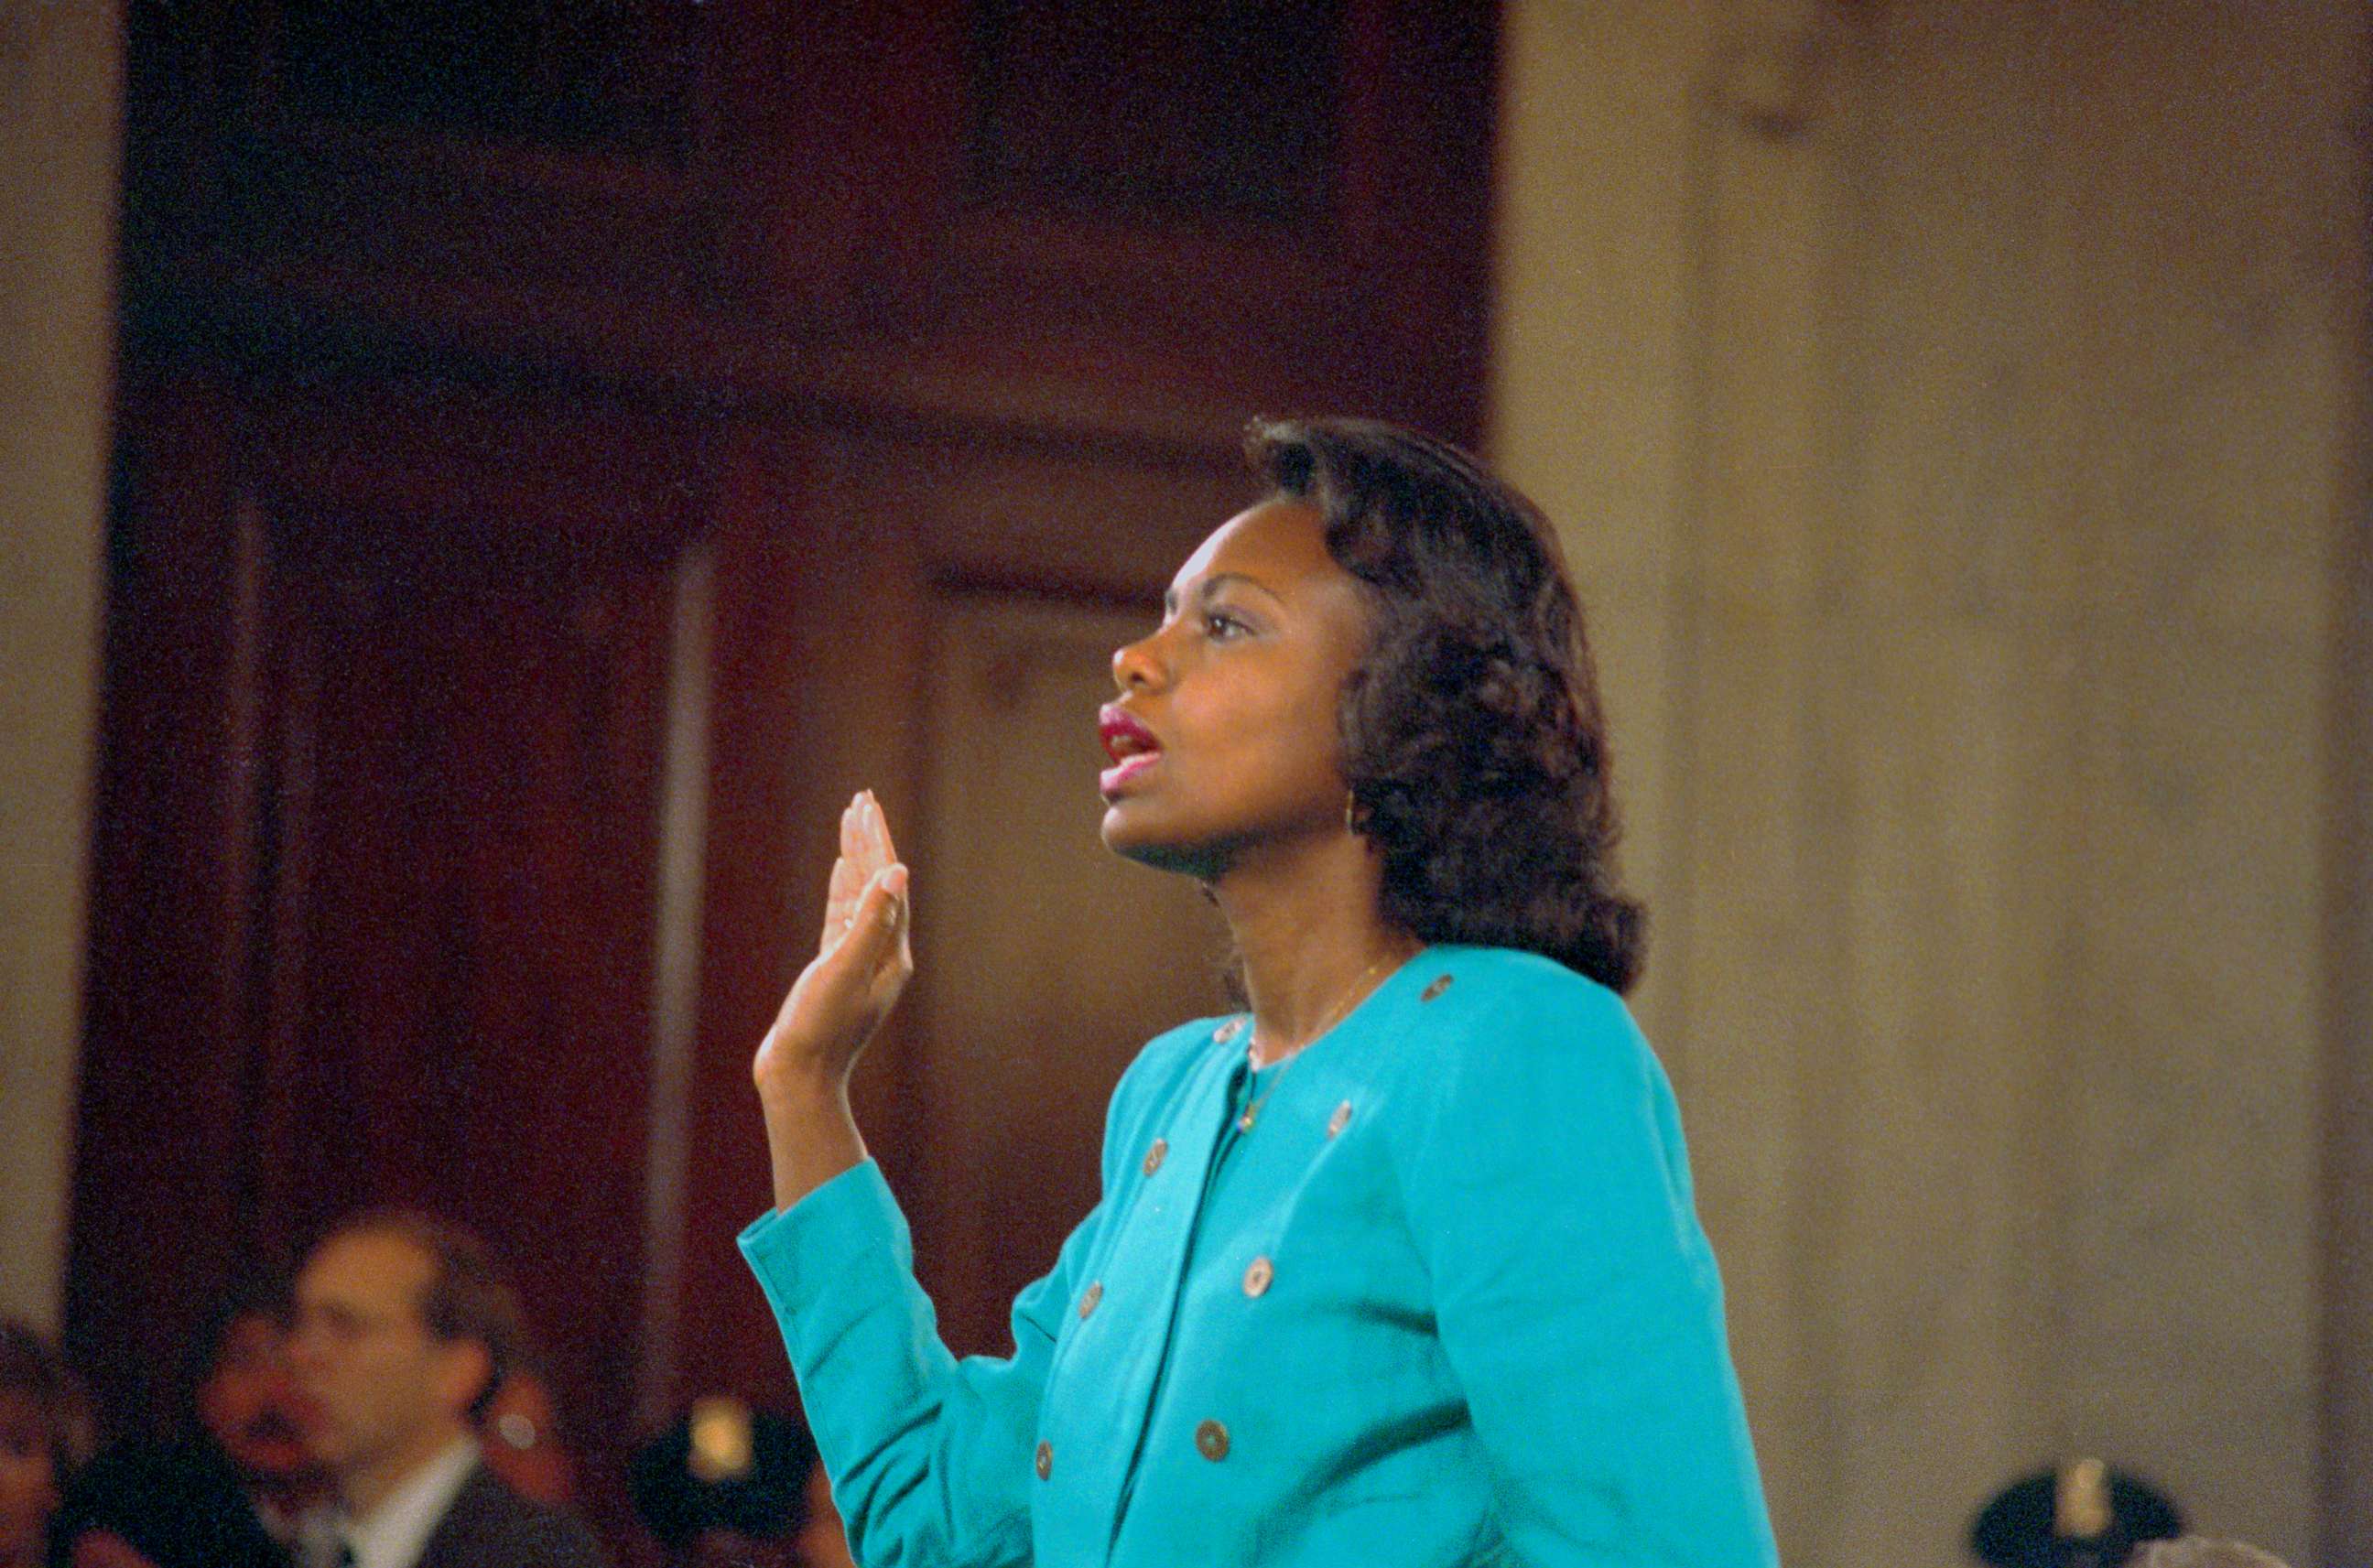 PHOTO: Professor Anita Hill is sworn-in before testifying at the Senate Judiciary hearing on the Clarence Thomas Supreme Court nomination. Miss Hill testified on her charges of alleged sexual harassment by Judge Thomas, Oct. 11, 1991.